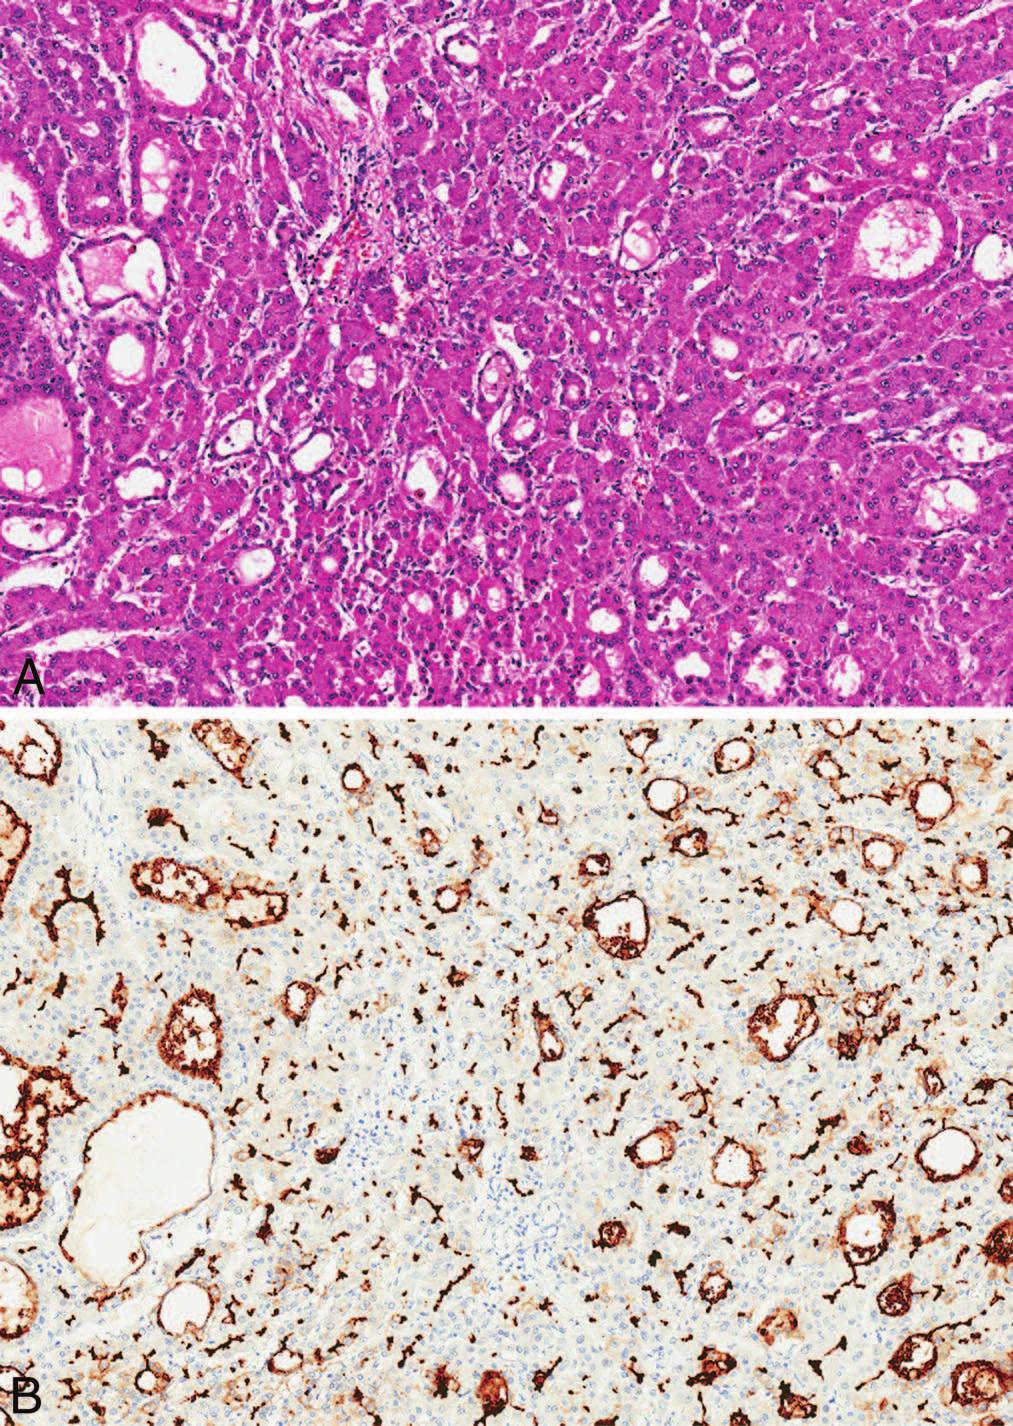 Figure 1. A, Well-differentiated hepatocellular carcinoma.